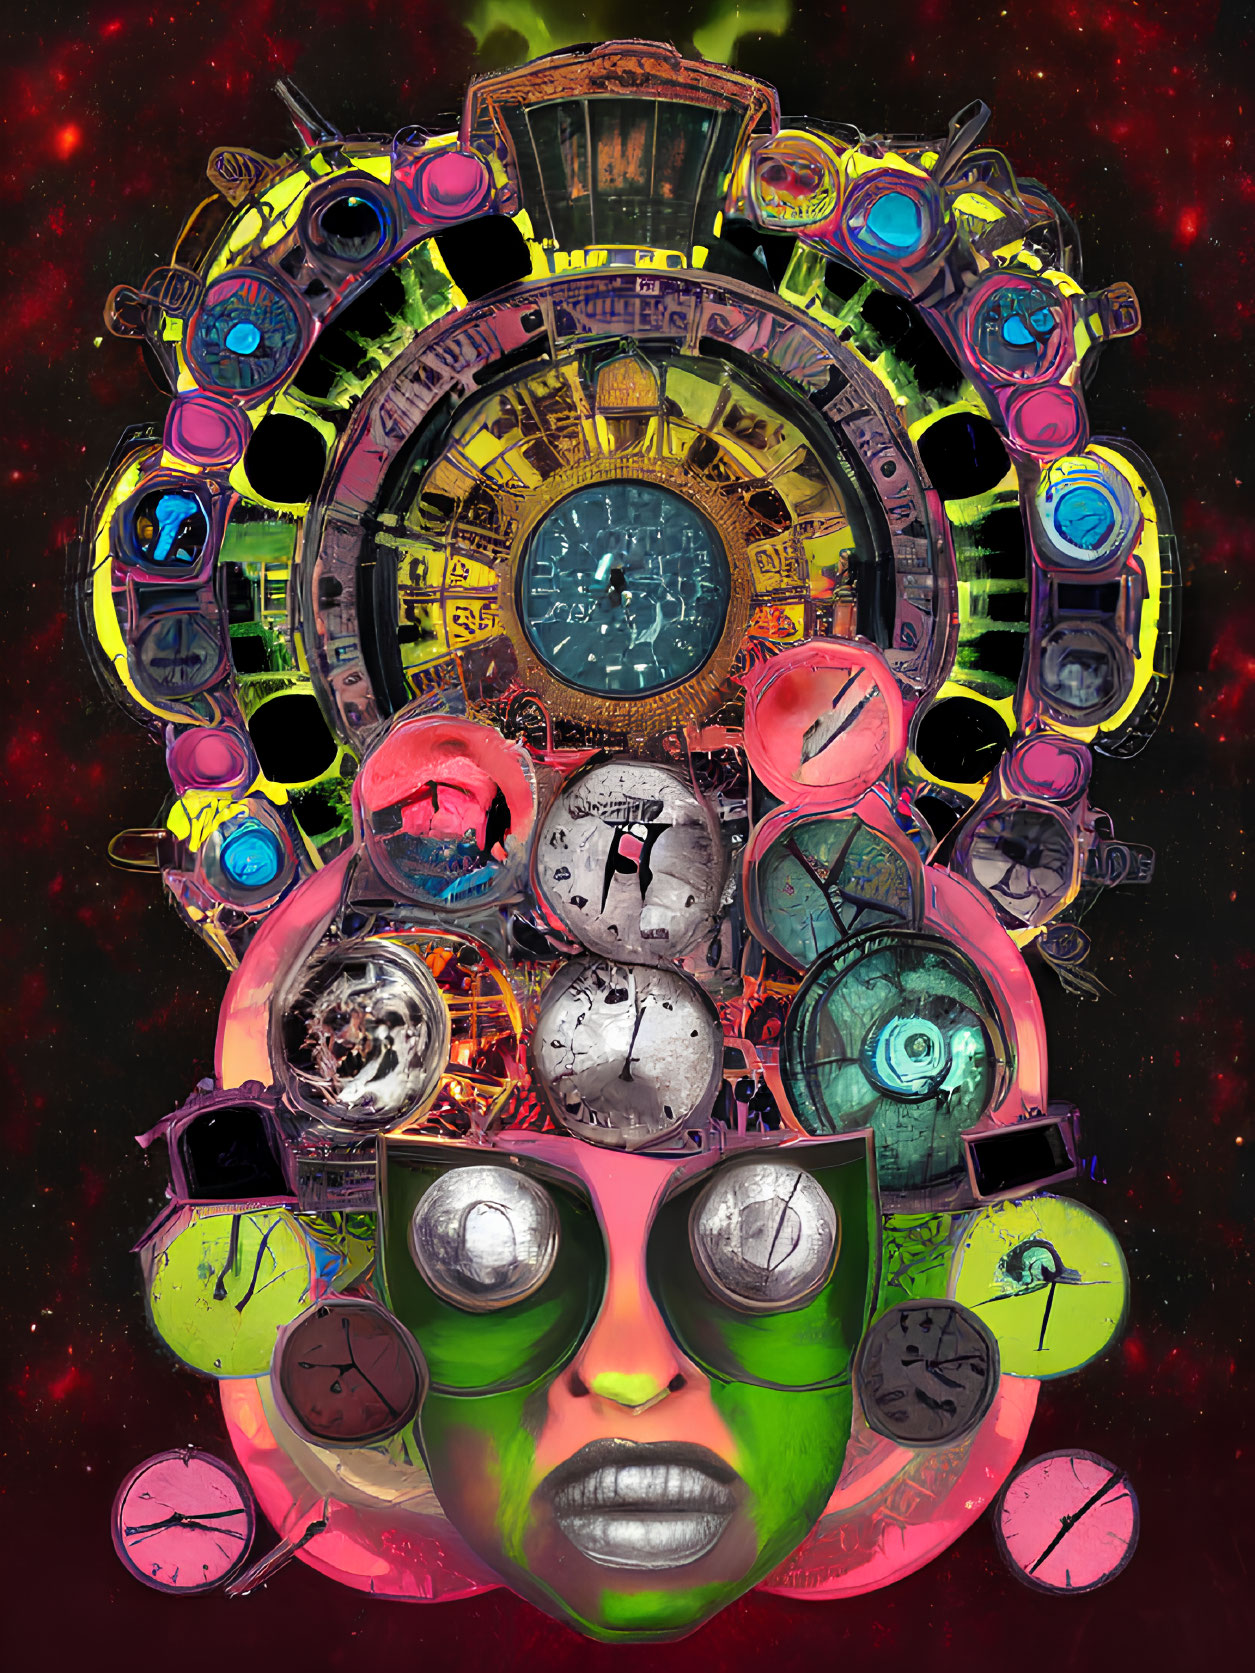 Surreal portrait with green-hued face and abstract clocks on cosmic background